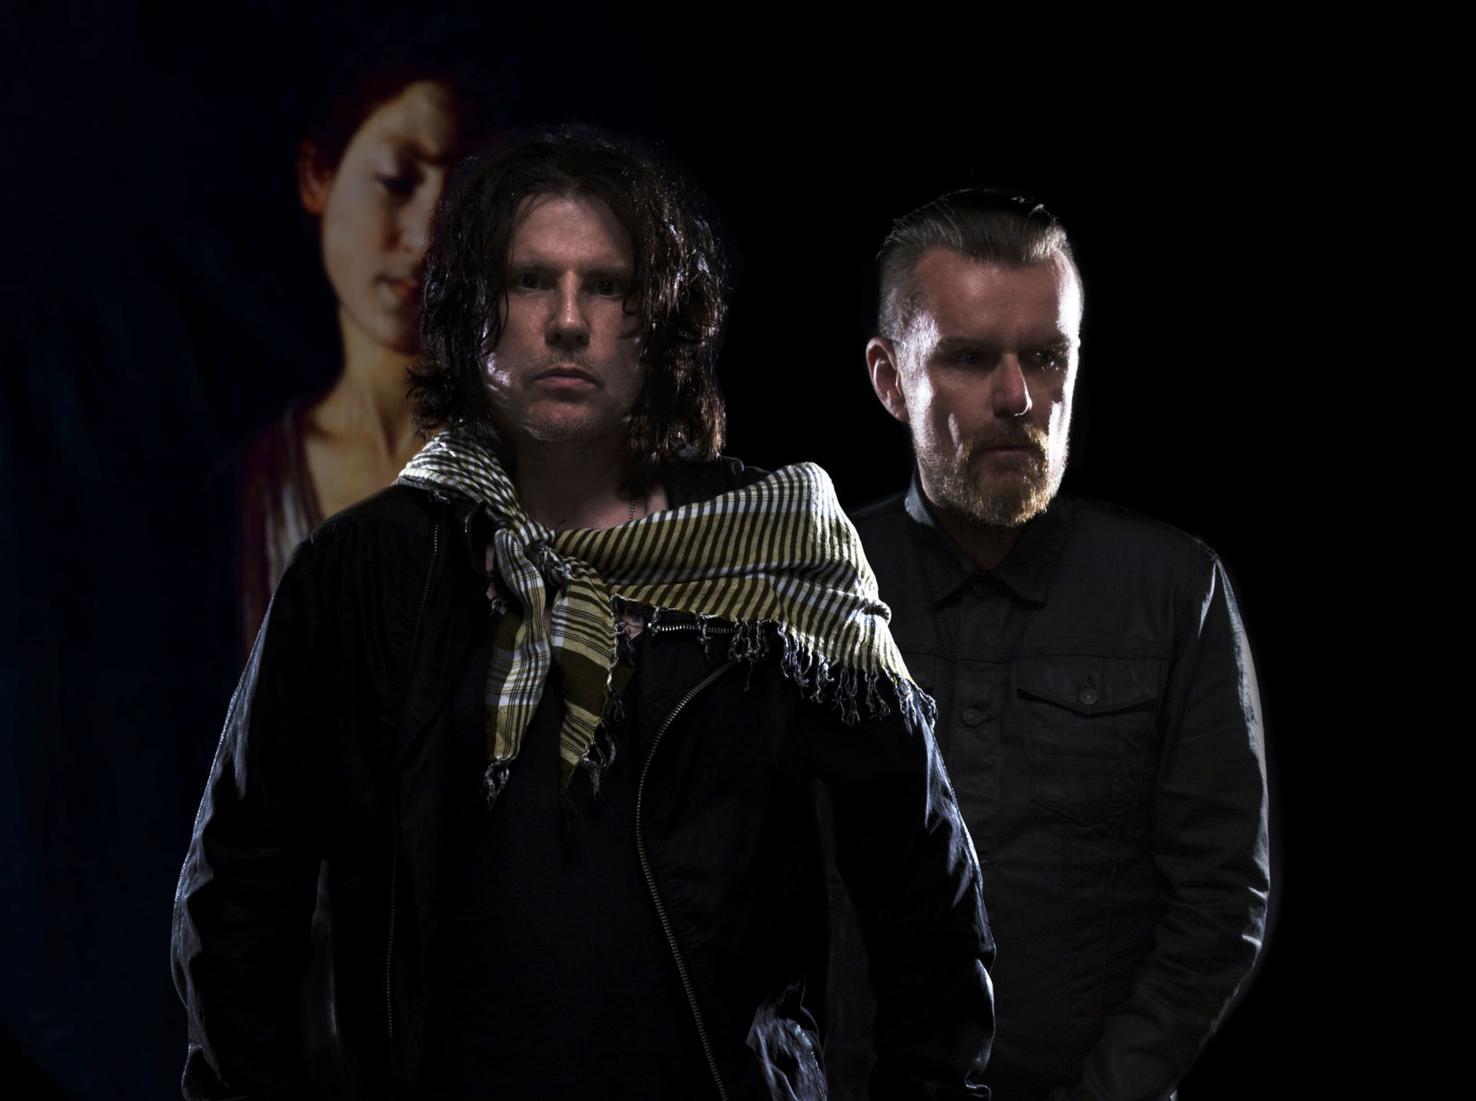 The Cult's Billy Duffy talks fans, longevity, and of course, music